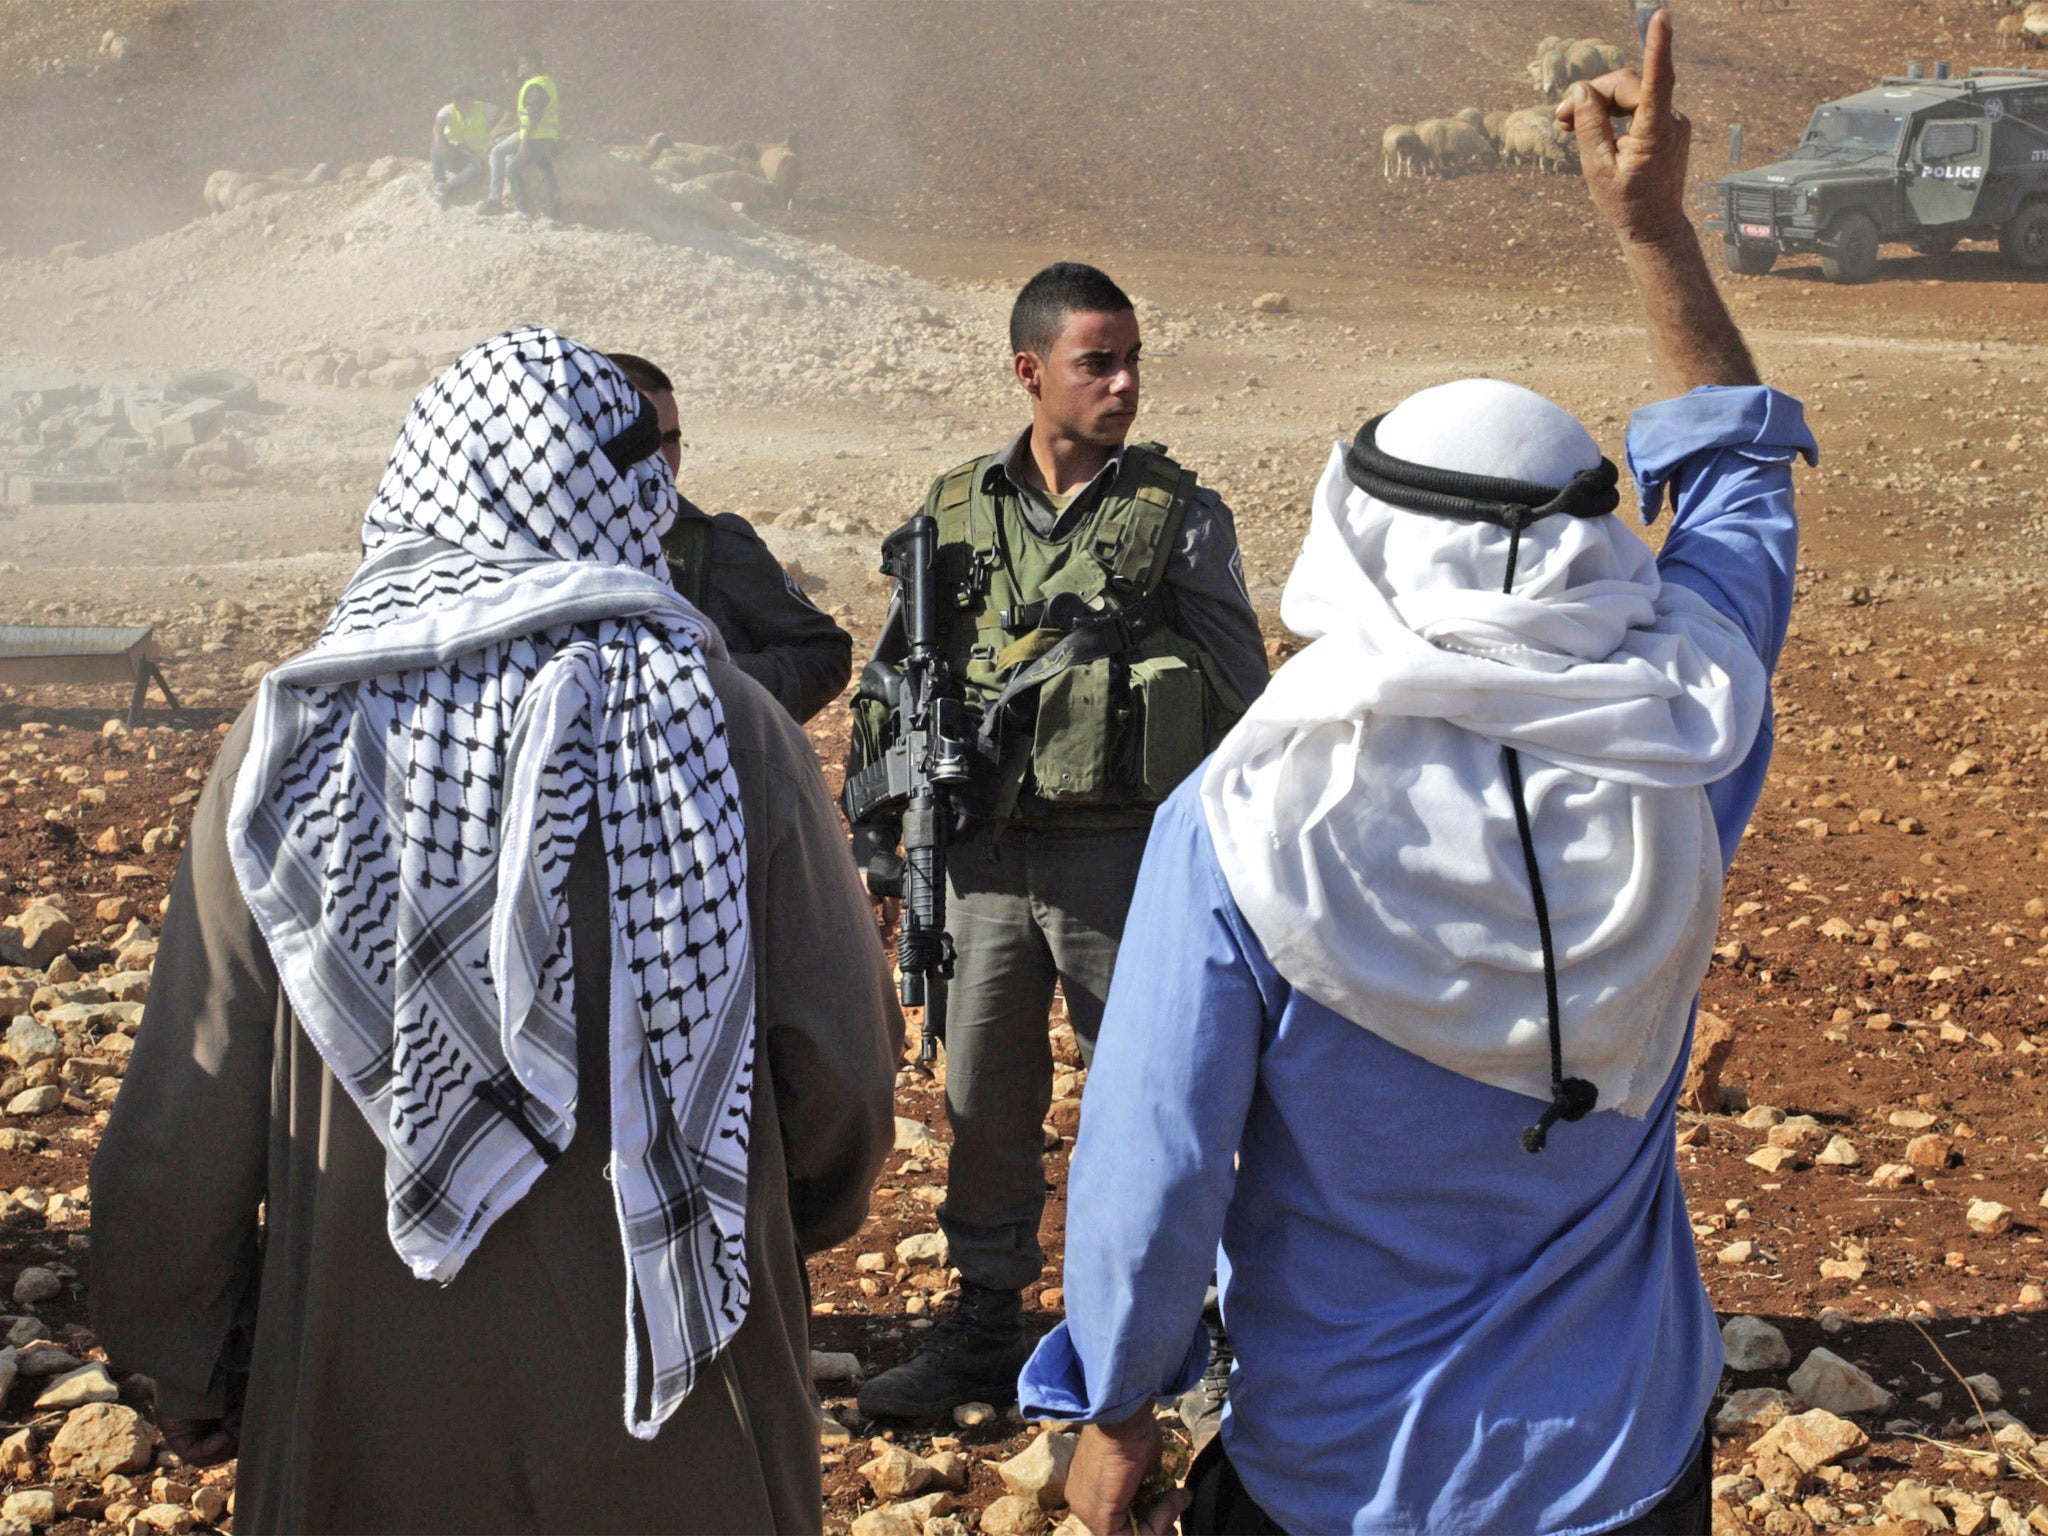 A Palestinian man shouts at Israeli soldiers after the demolition of tin shacks, animal shelters, tents and water wells in Aqraba village, near the settlement of Itamar, Nablus, West Bank